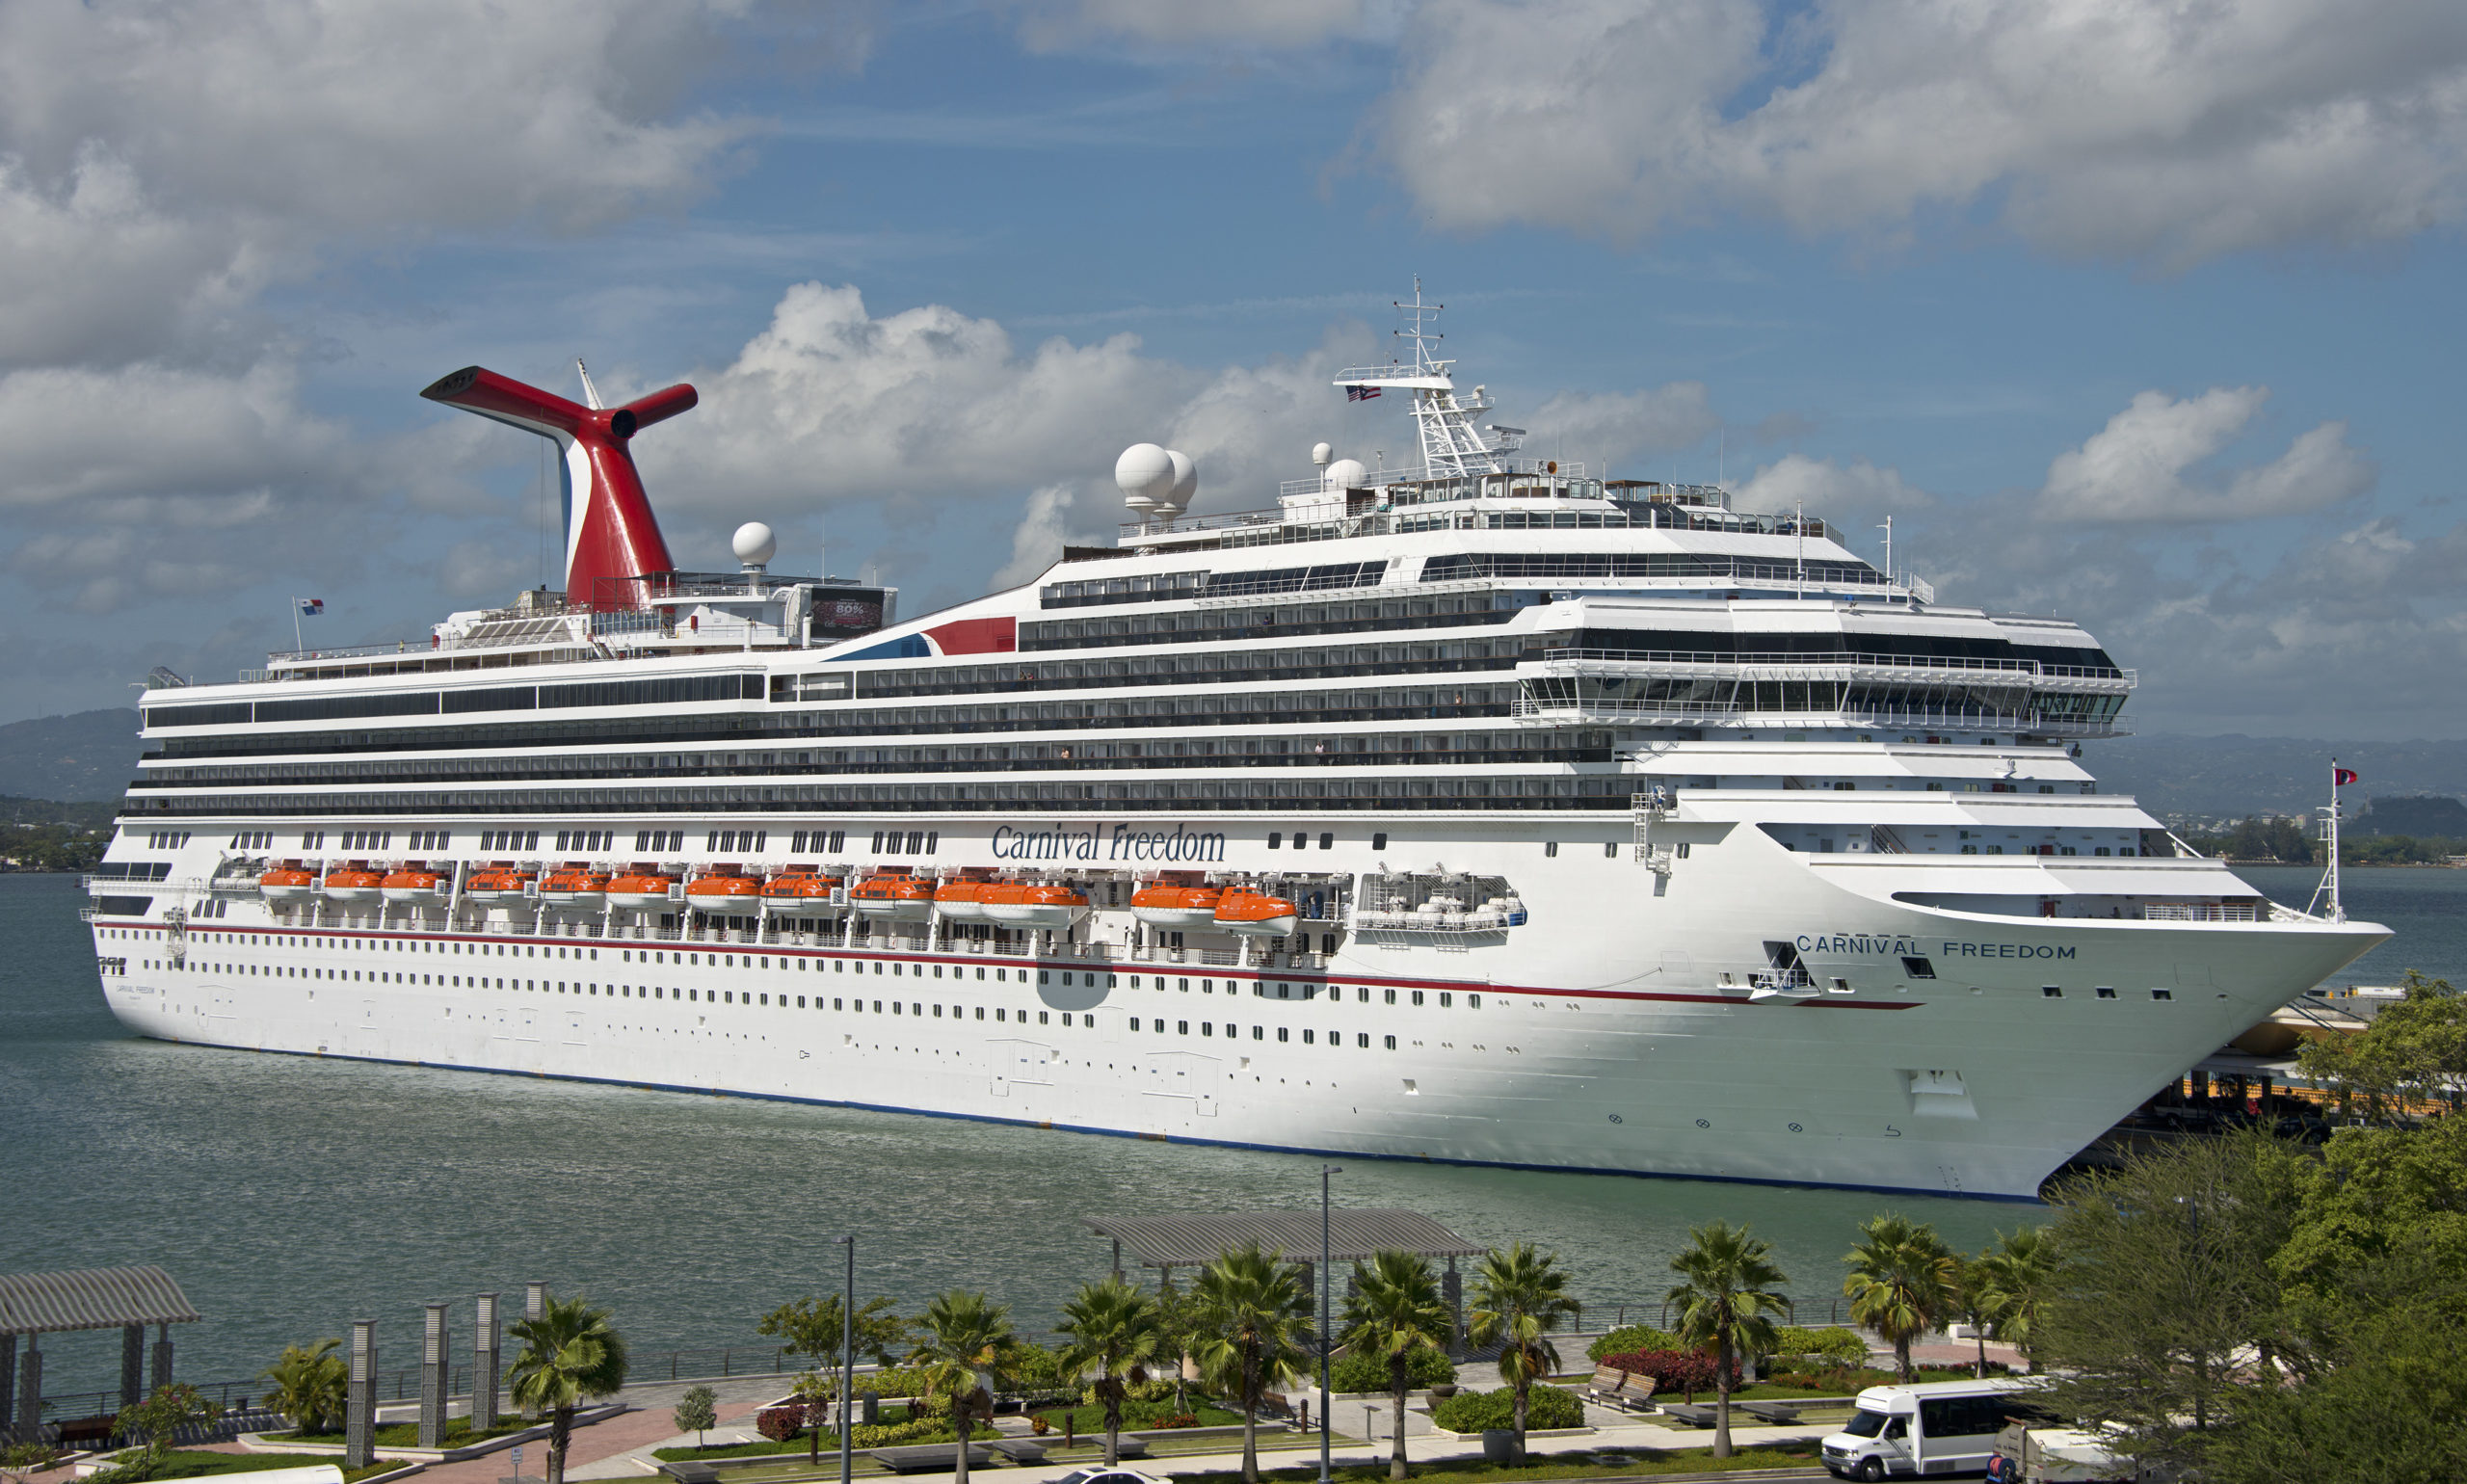 Katy's Gone Cruising Carnival Freedom offers the latest in family fun